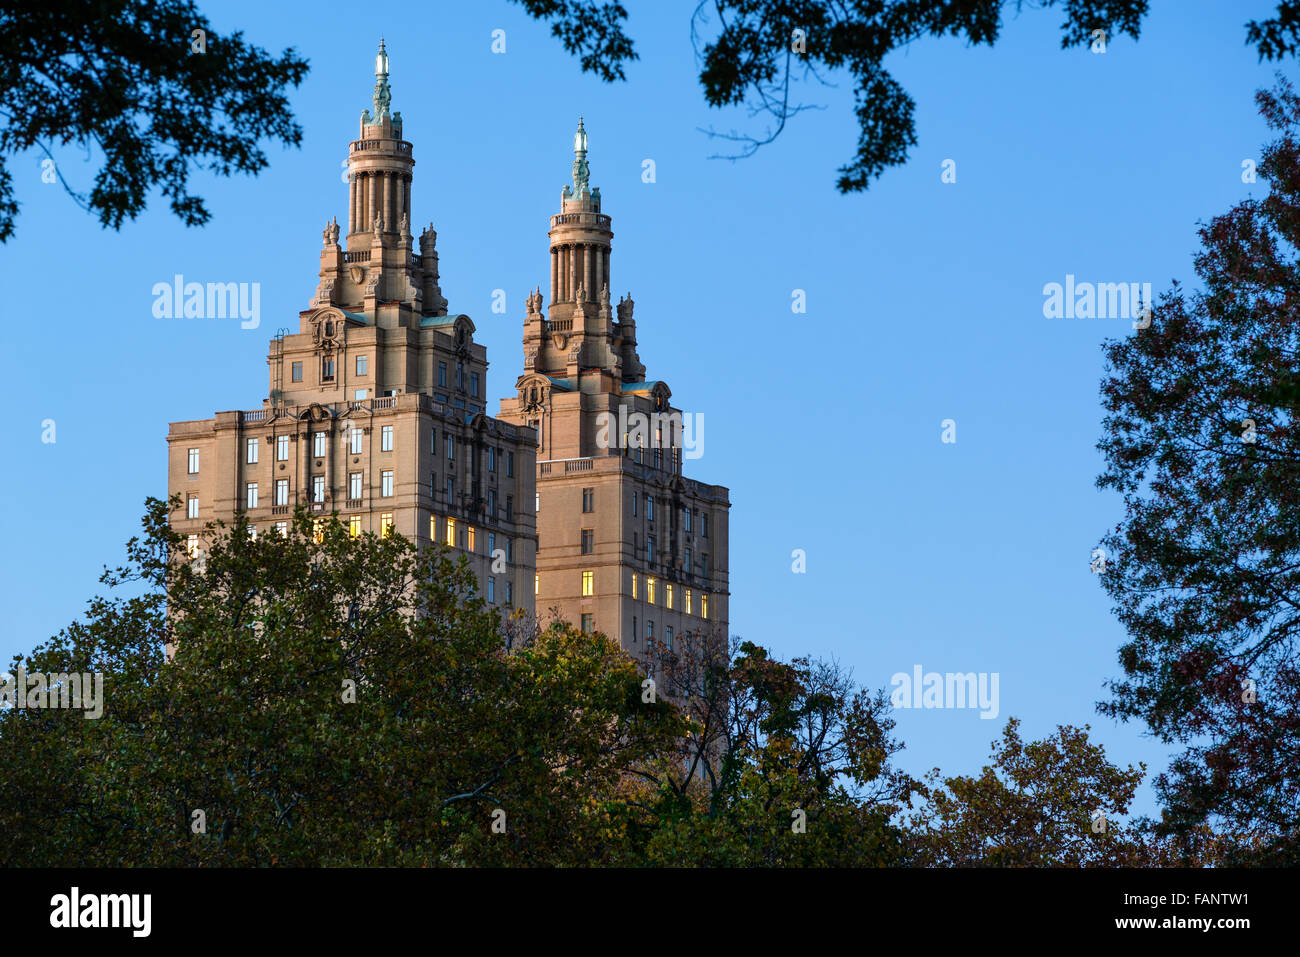 Close-up of the two towers of the San Remo building at twilight across Central Park, Upper West Side, Manhattan, New York City. Stock Photo